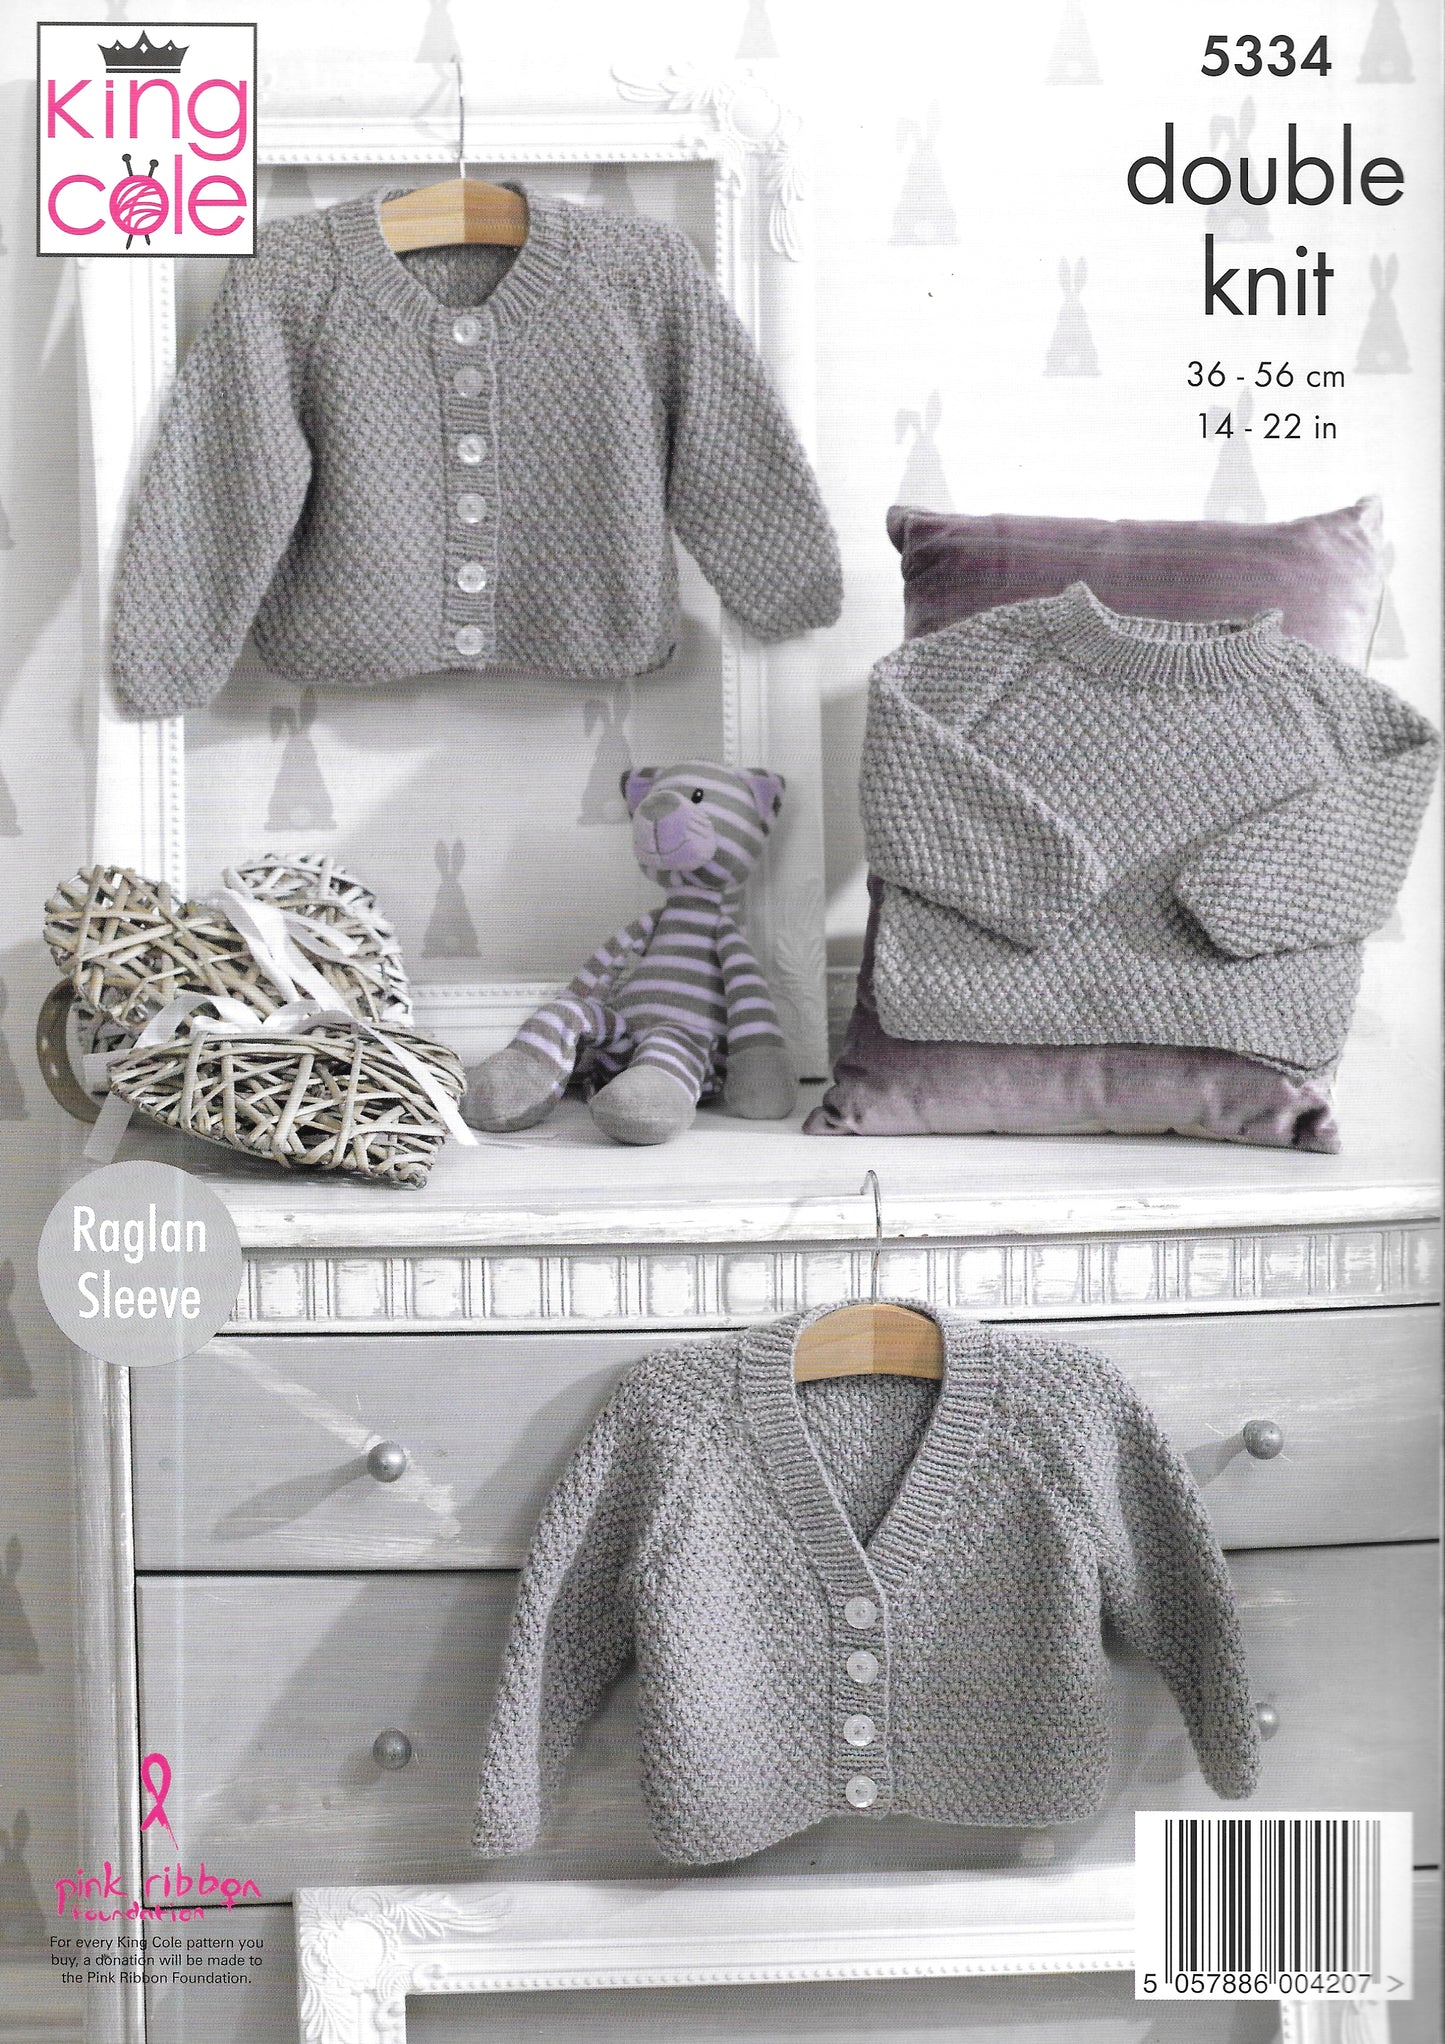 5334 King Cole double knit Cardigans and Sweater knitting pattern